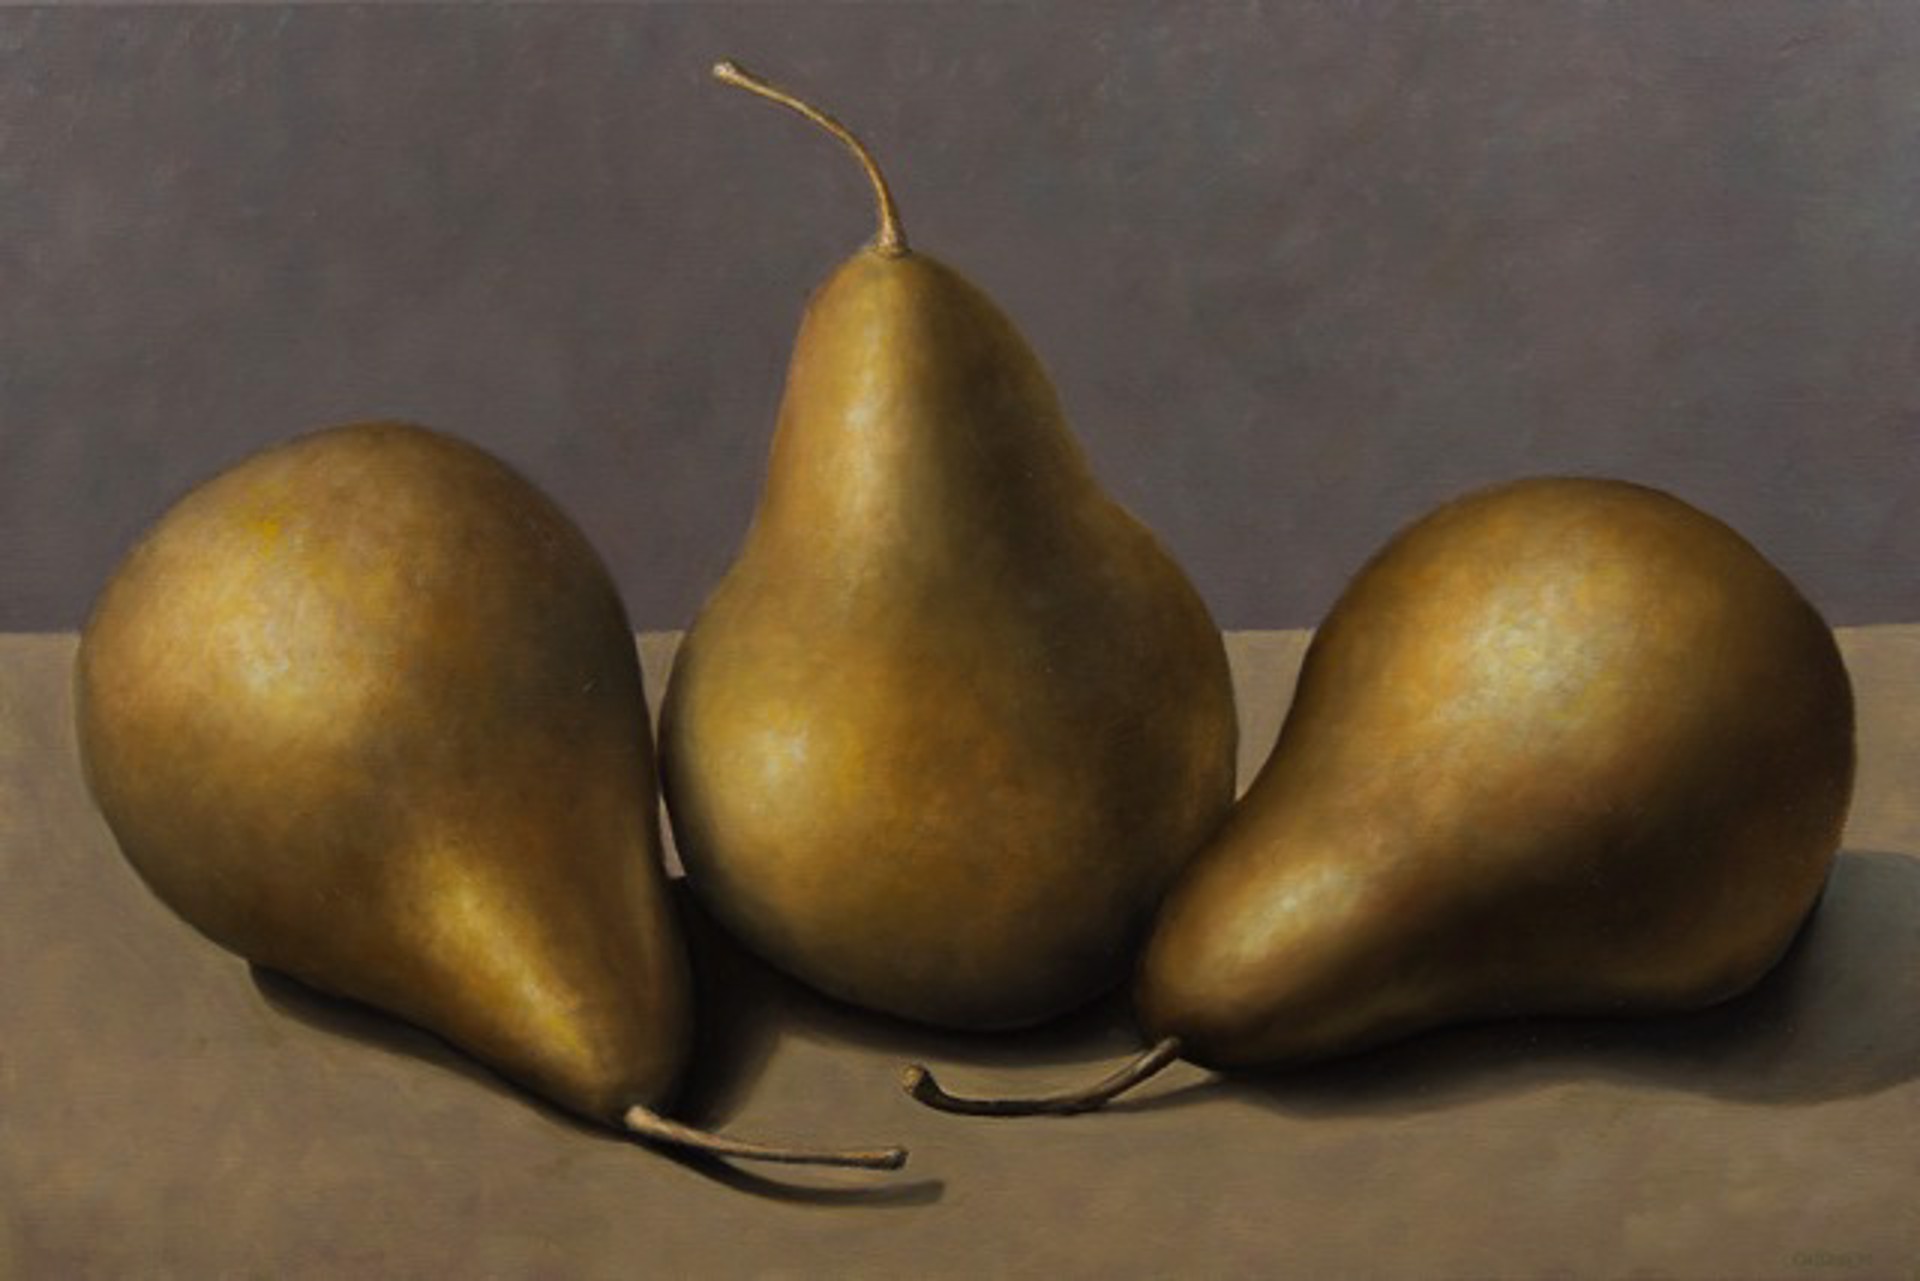 Three Golden Pears by Bill Chisholm